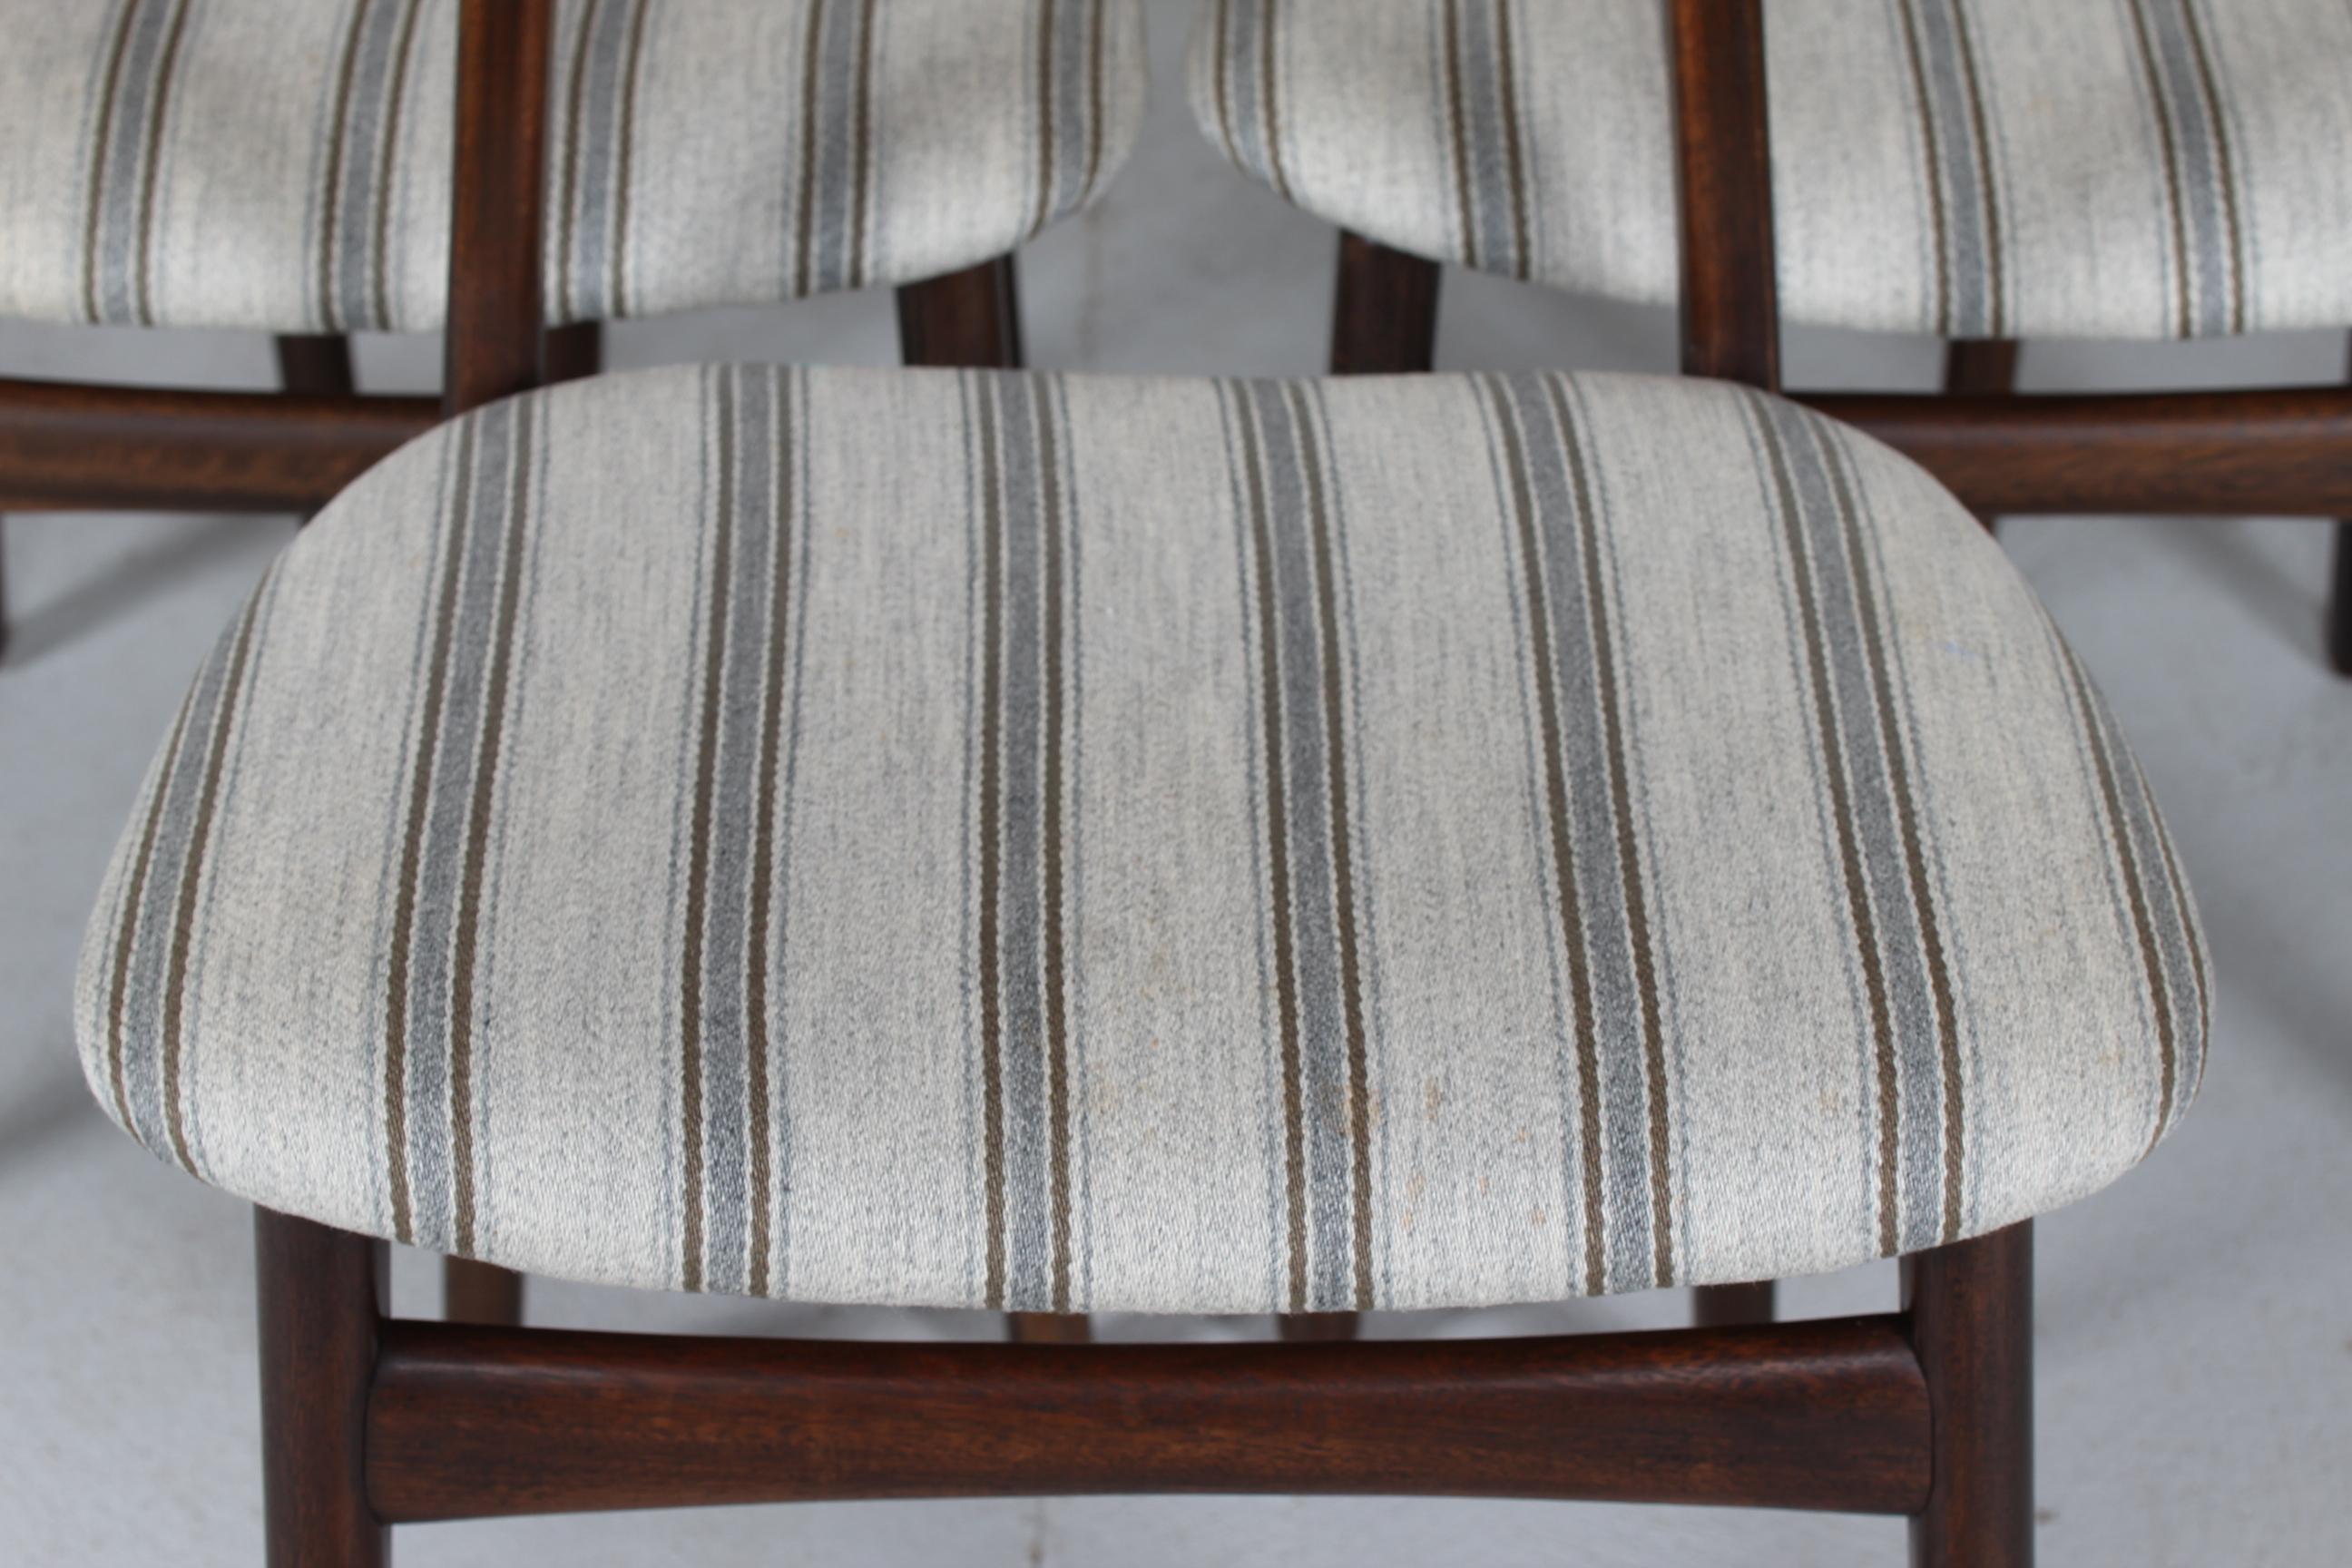 Woven Danish Modern Set of Six Curved Back Dining Room Chairs with Striped Upholstery